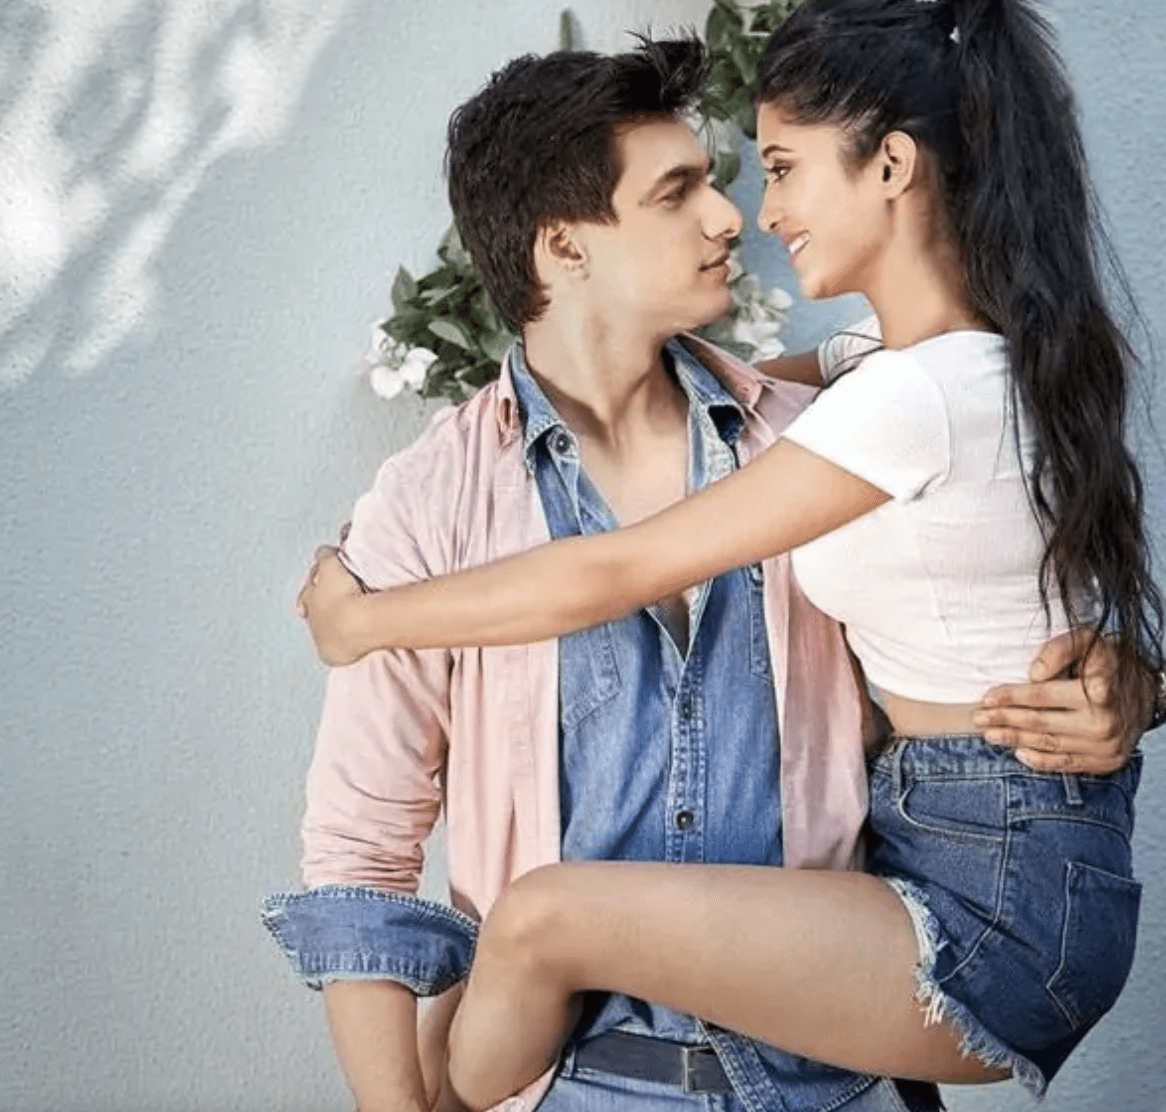 Here's how Shivangi Joshi and Mohsin Khan spent their free time on the sets of Yeh Rishta Kya Kehlata Hai before their ugly break up, view pics